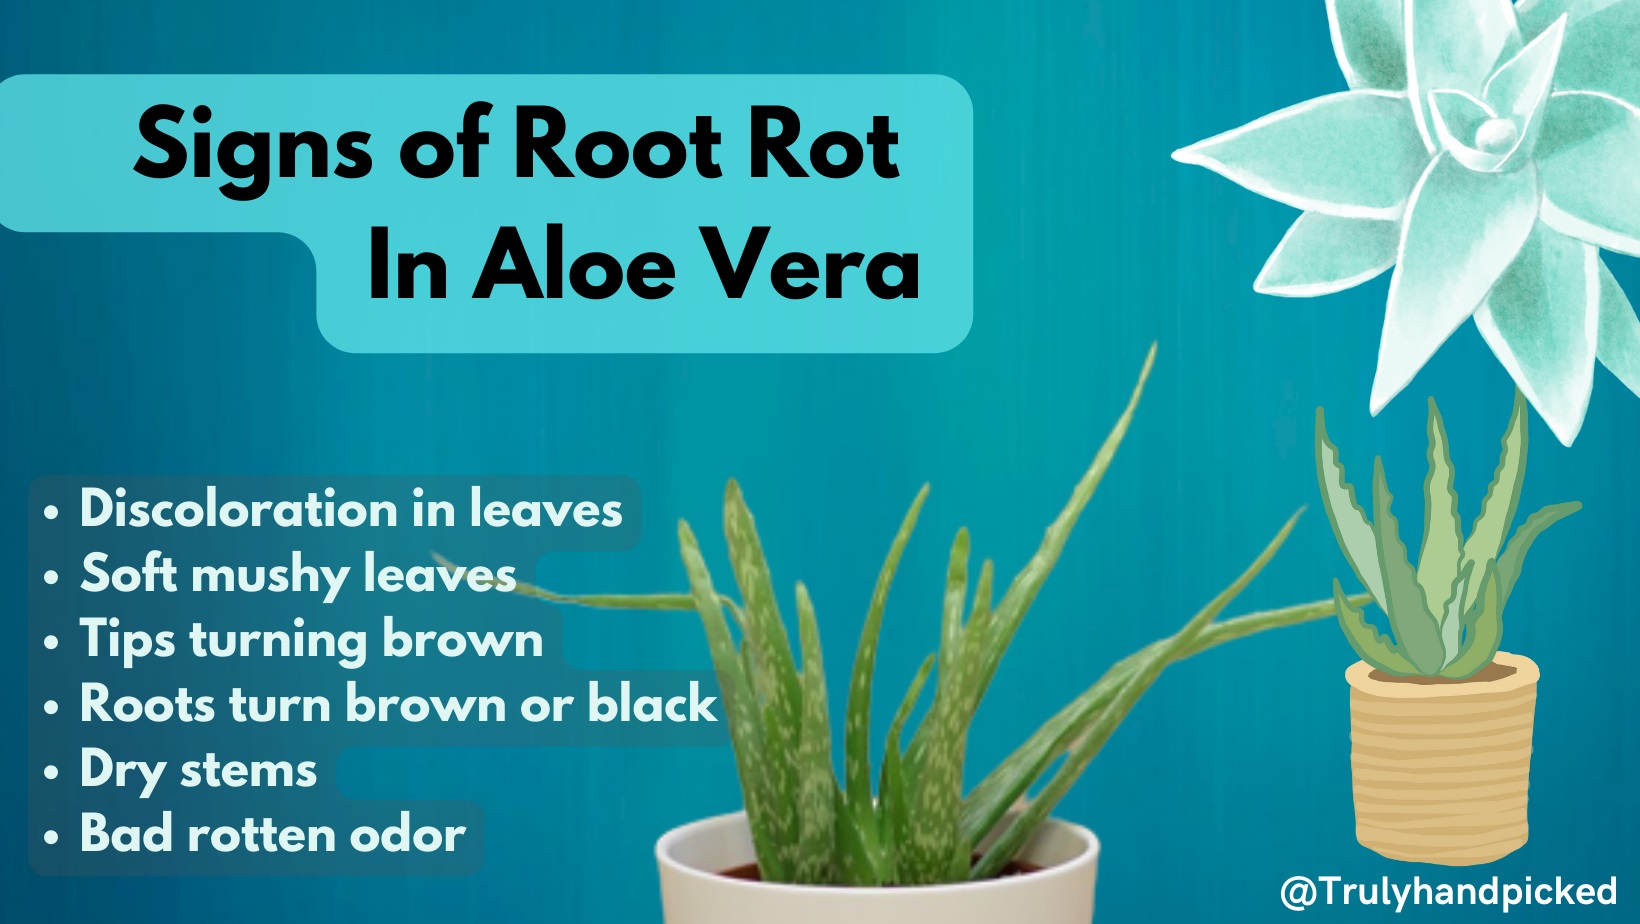 Signs Symptoms that tell about root rot in your aloe vera